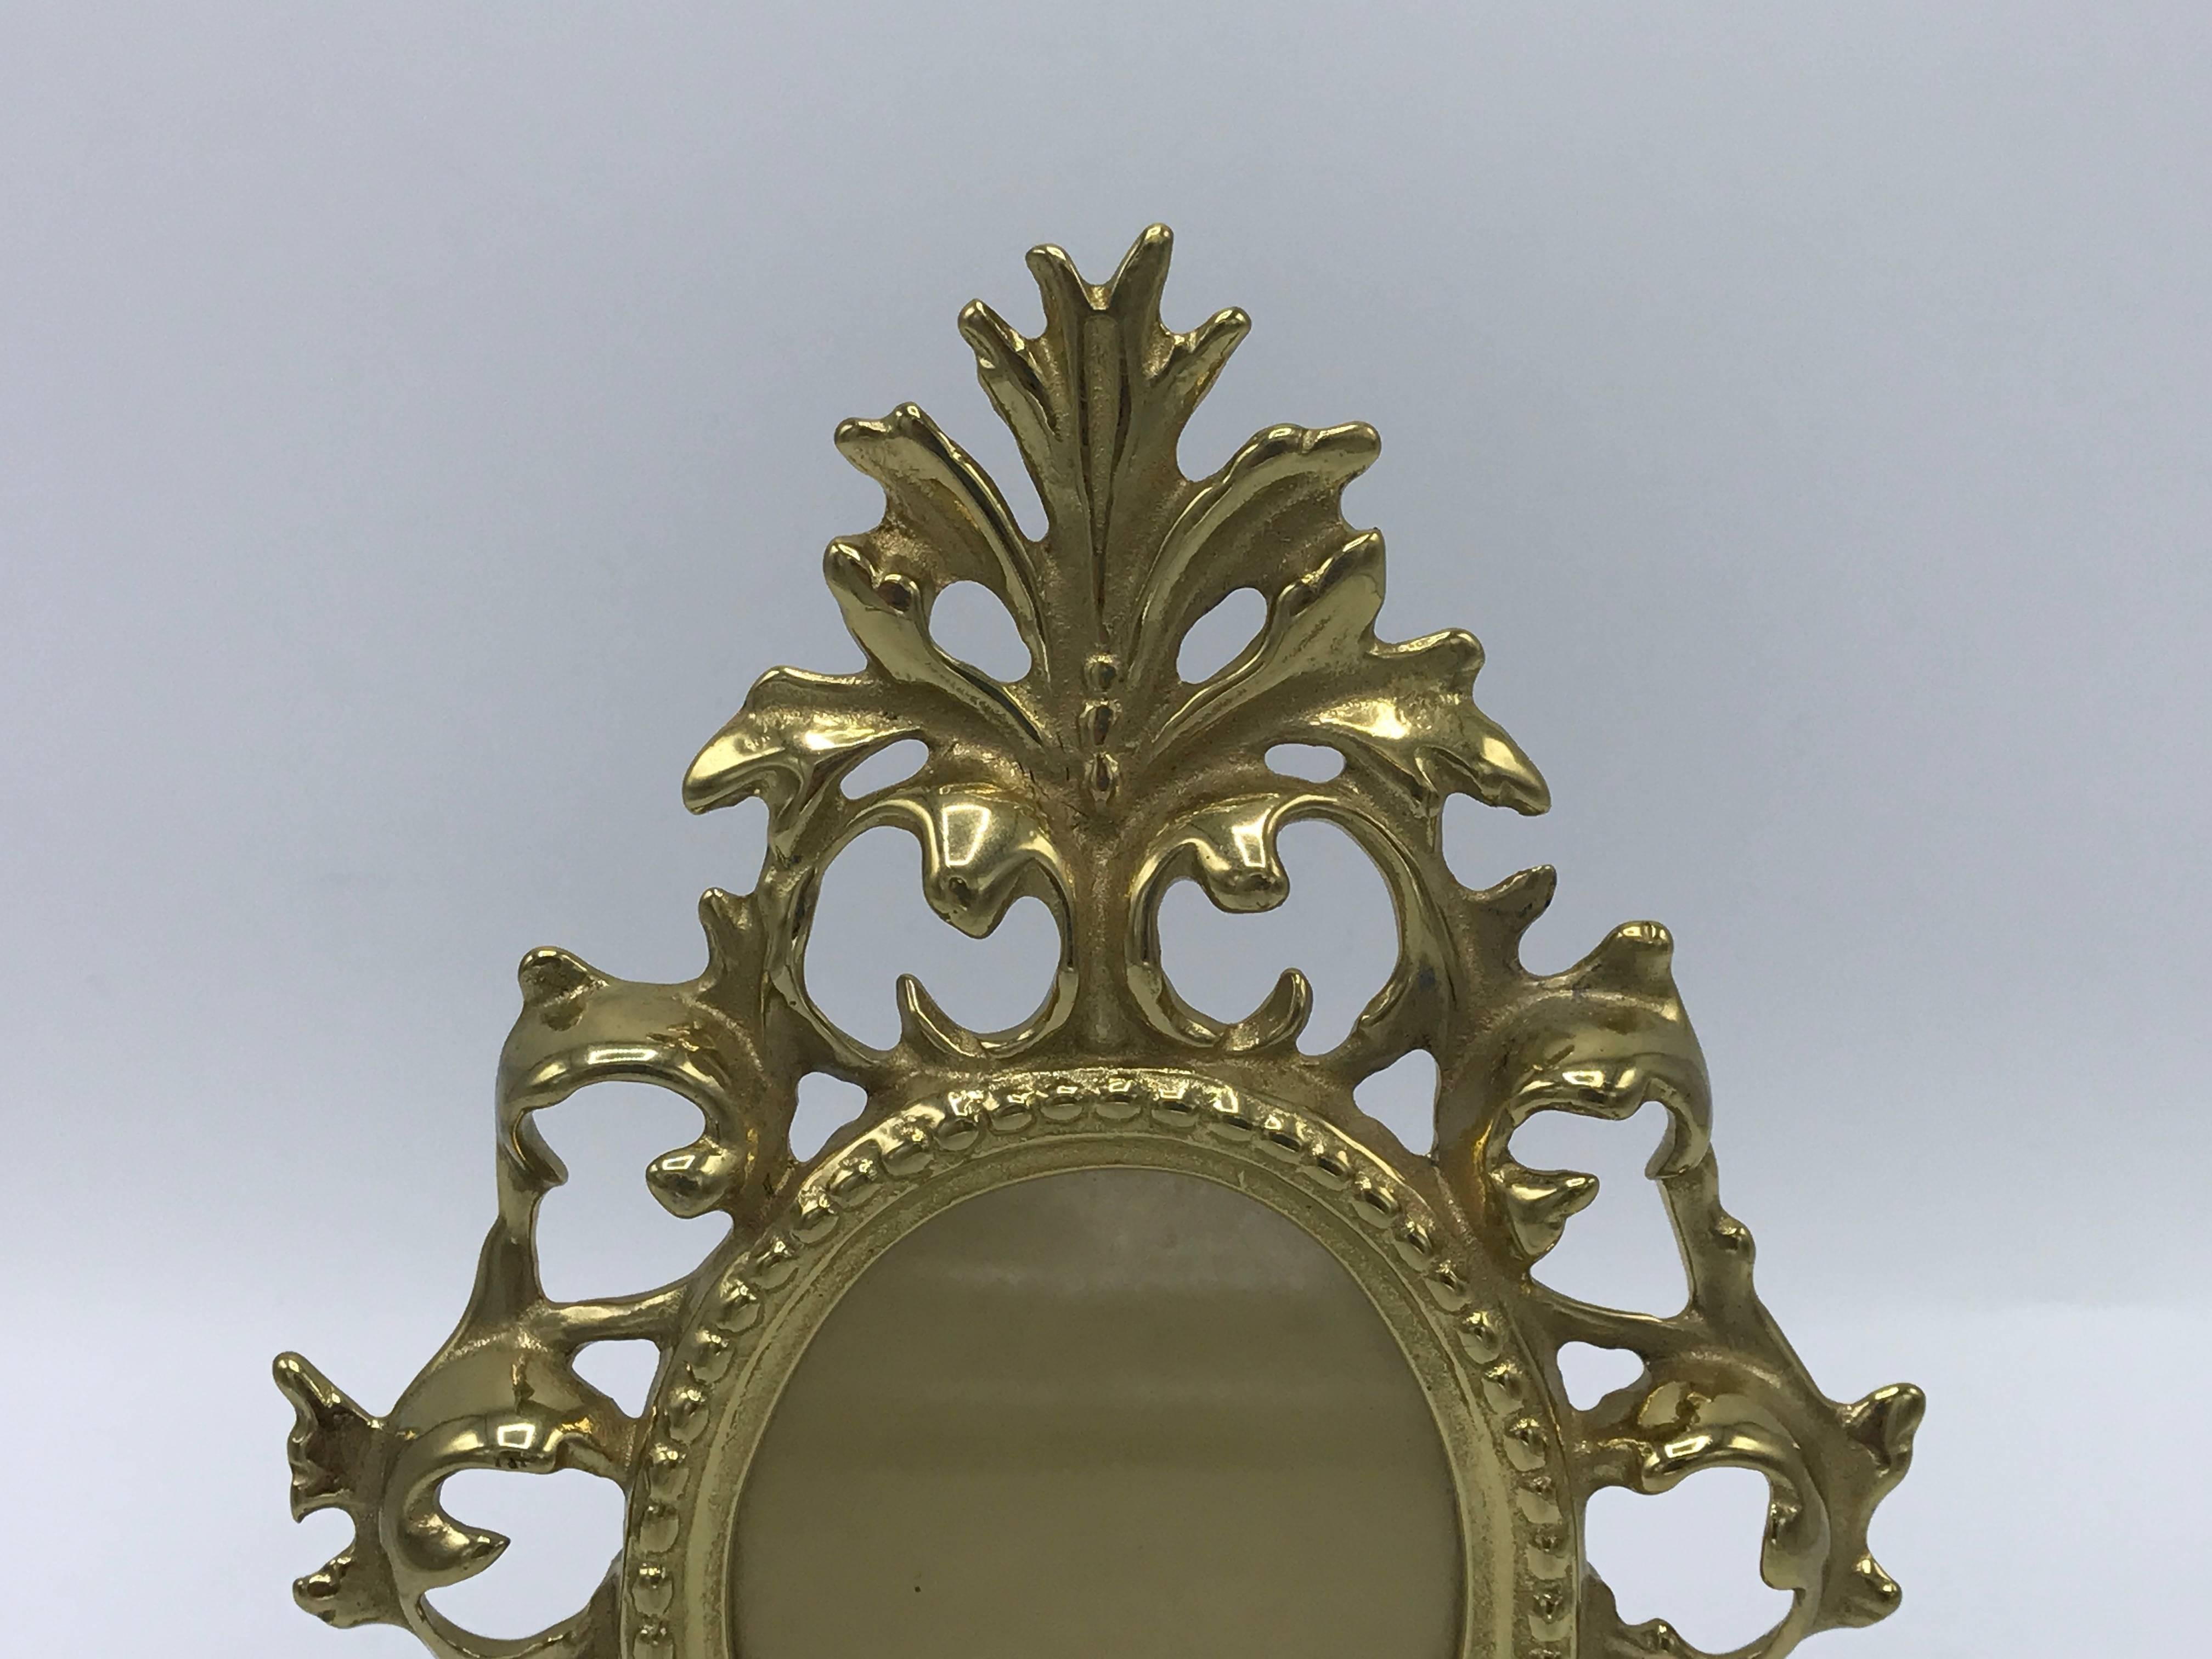 Offered is a gorgeous, new with tag, 1980s Virginia metal crafters Rococo style picture frame.